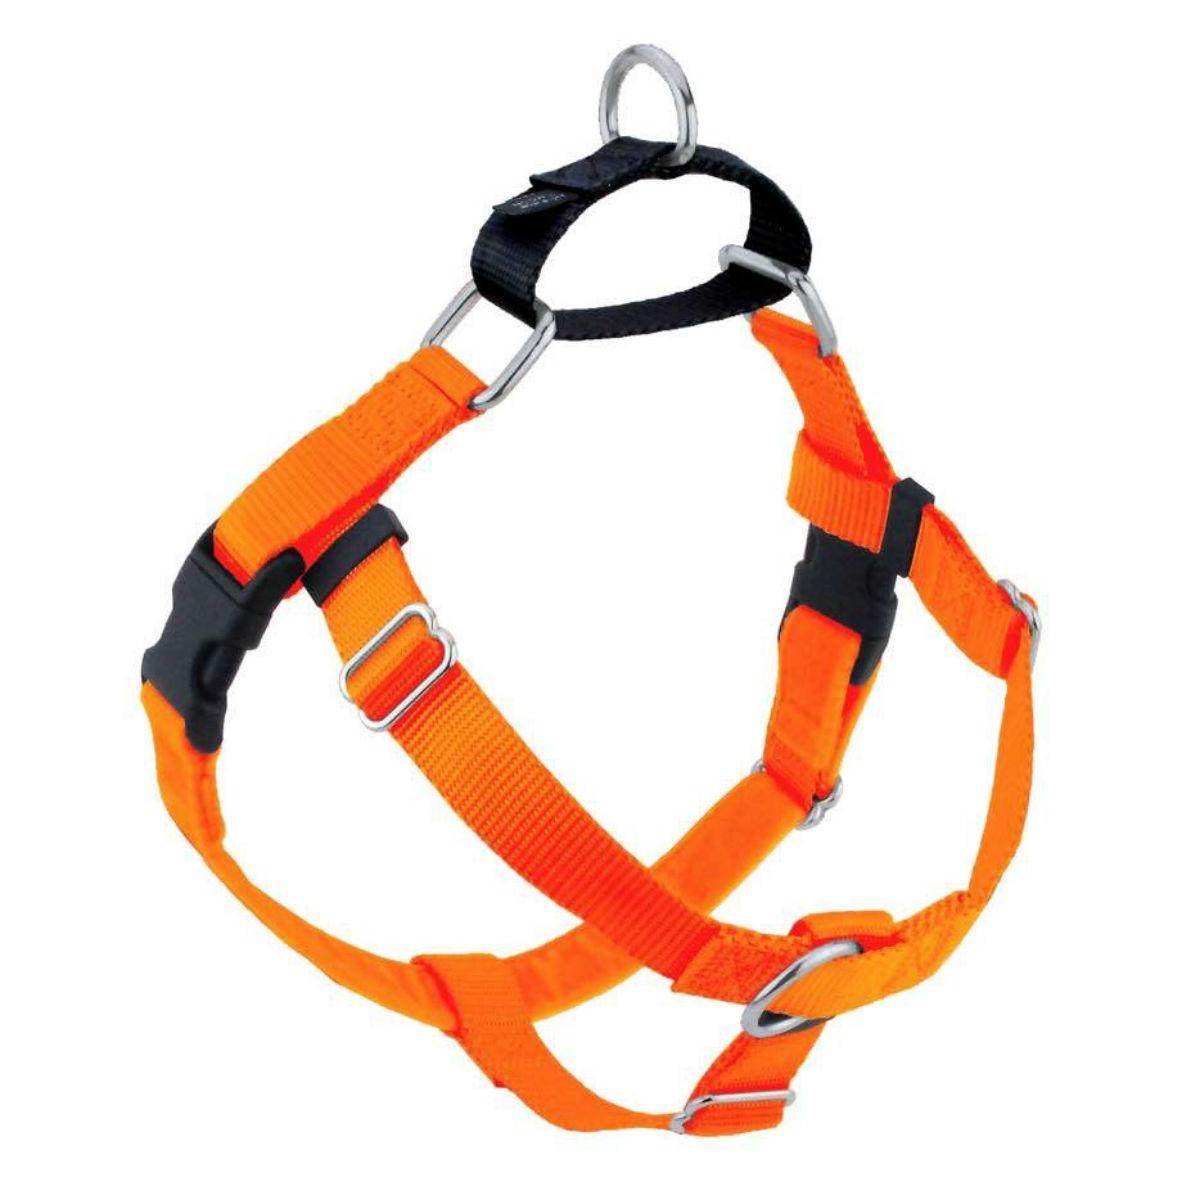 2 Hounds Design No-Pull Dog Harness Deluxe Training Package - Neon Orange and Black